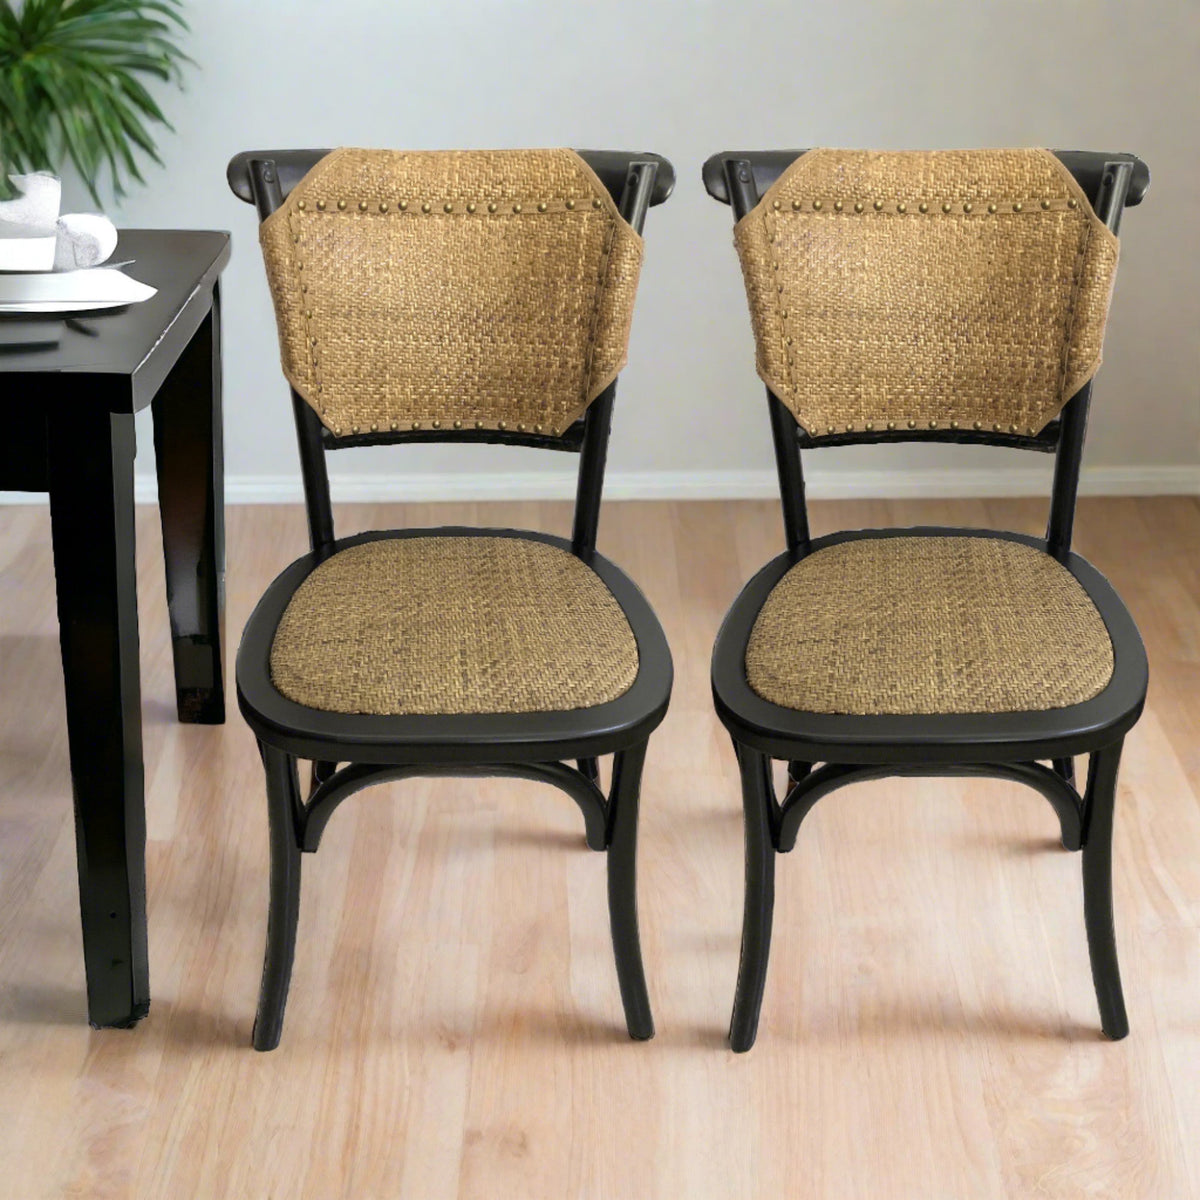 Set of 2 Colmar Side Chairs in Rattan and Wood